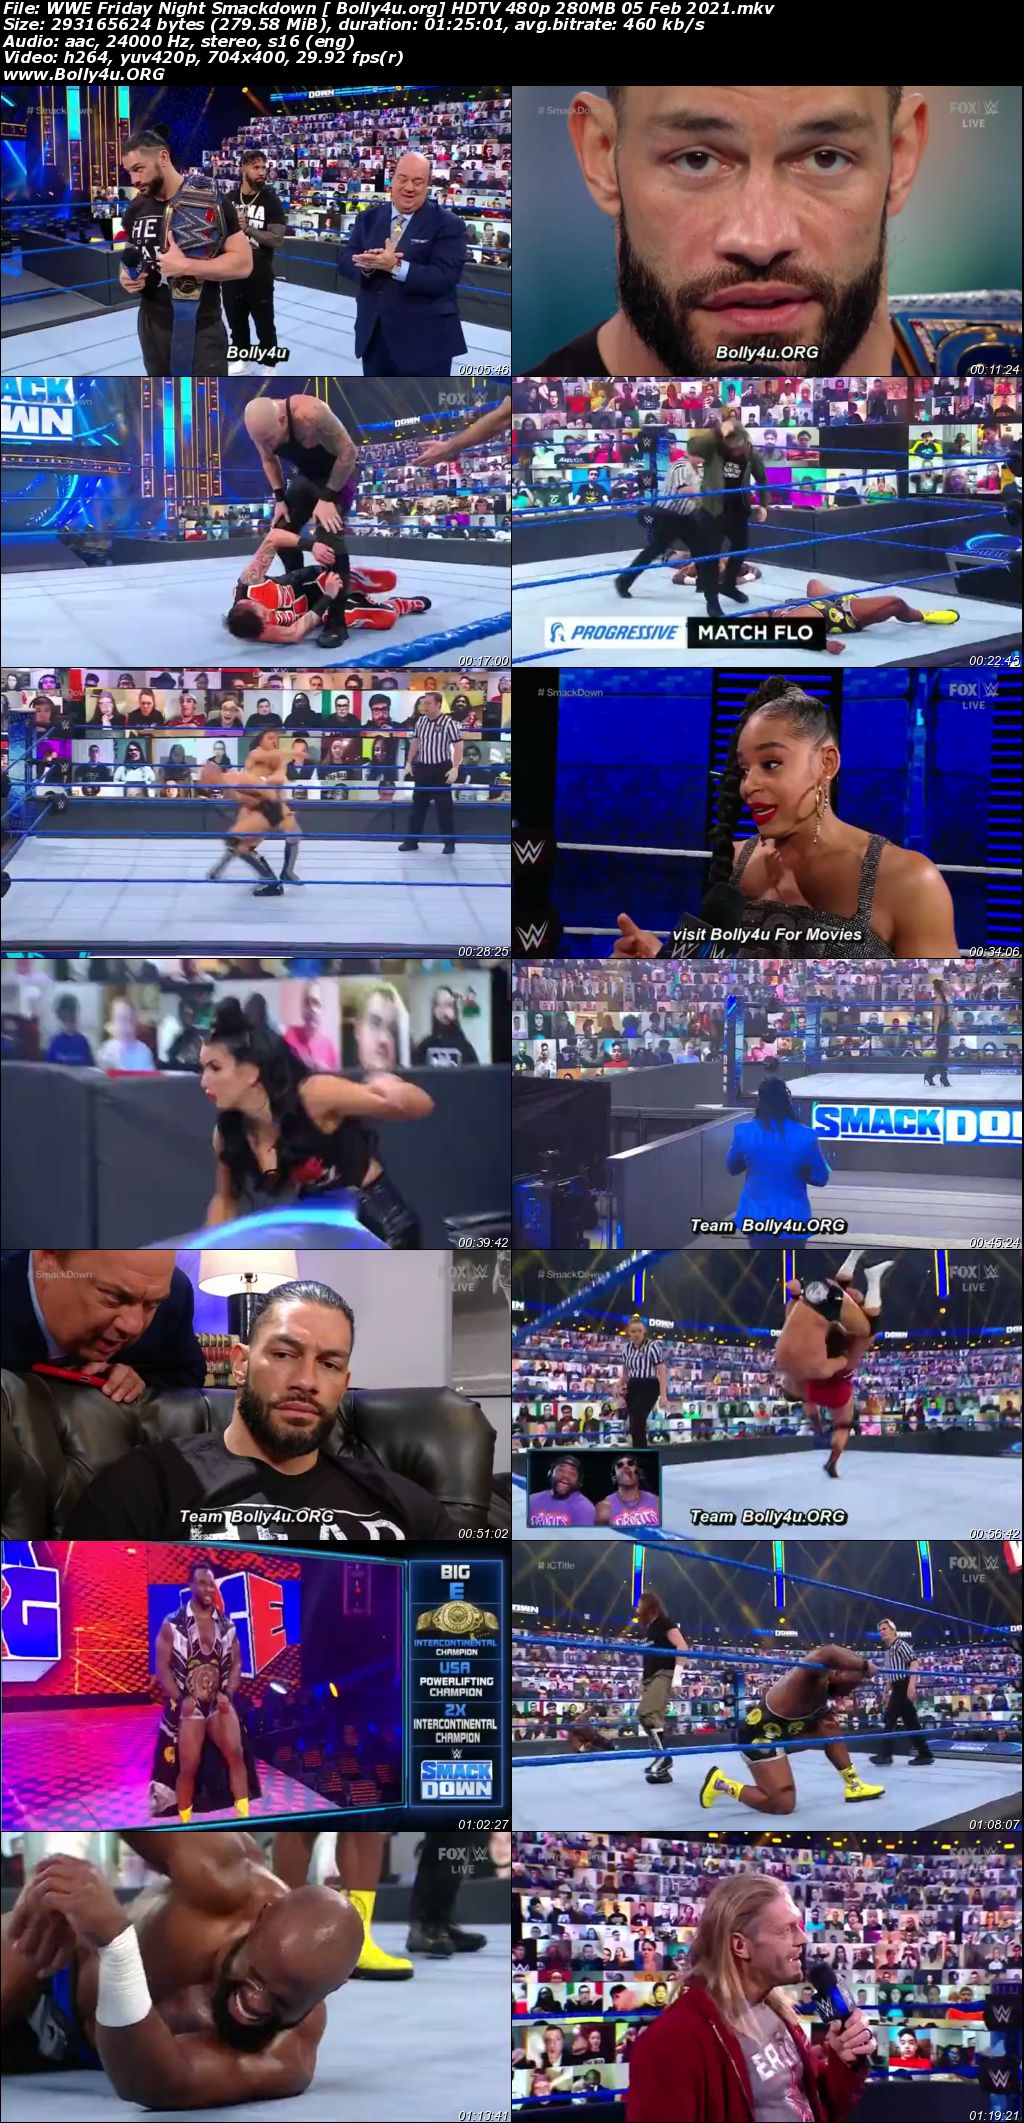 WWE Friday Night Smackdown HDTV 480p 280MB 05 Feb 2021 Download